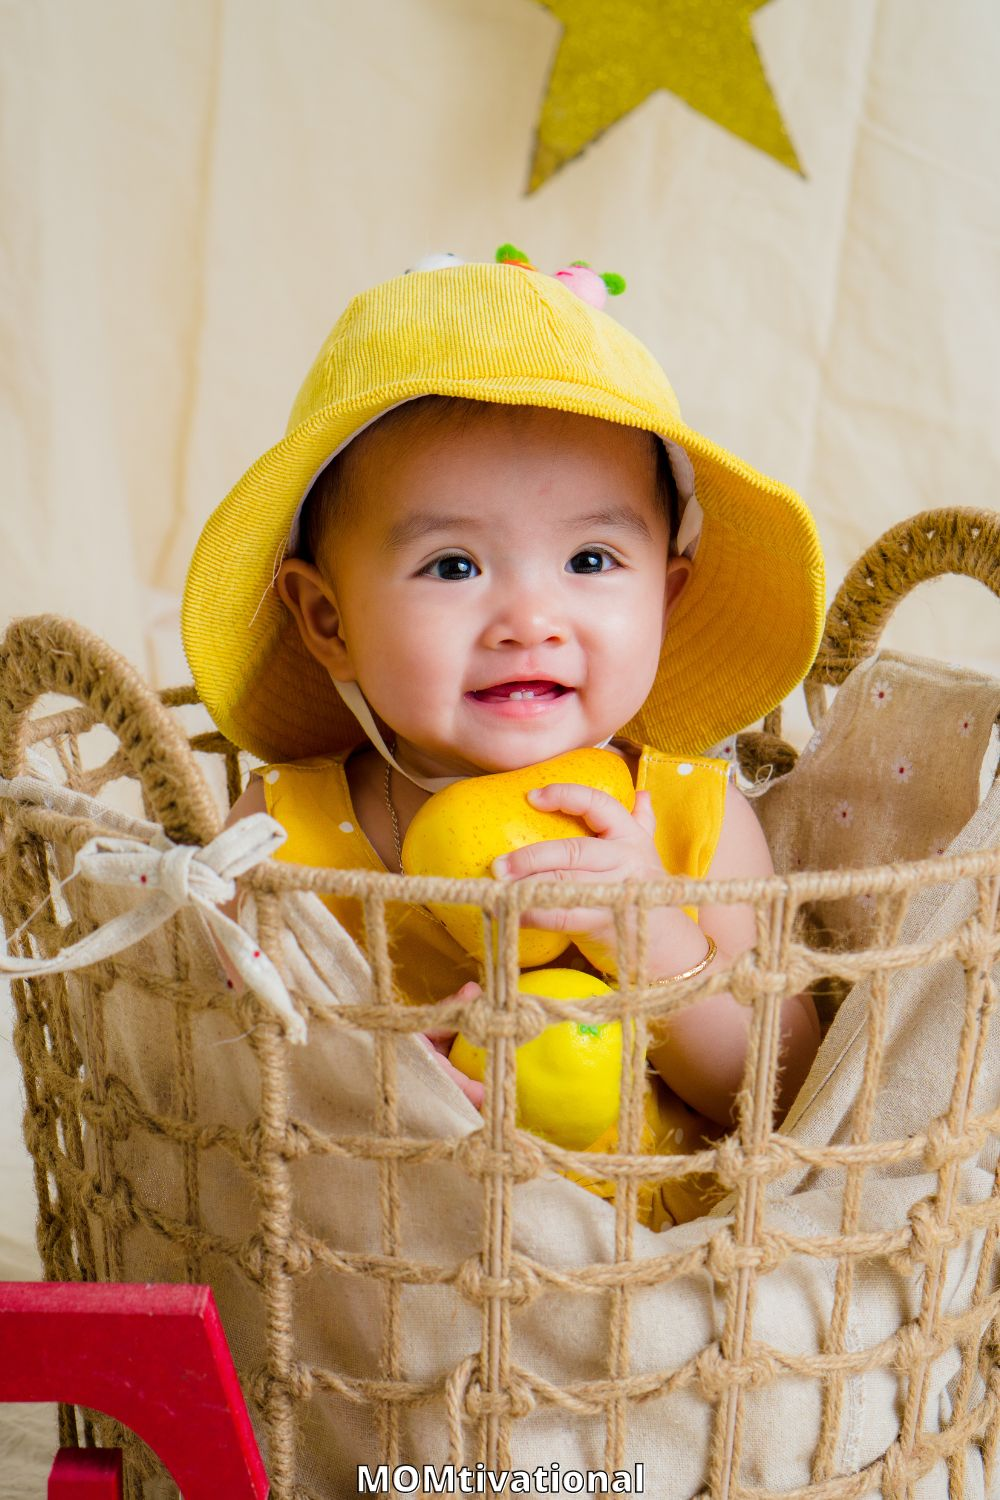 Gorgeous baby boy in a basket with a yellow hat